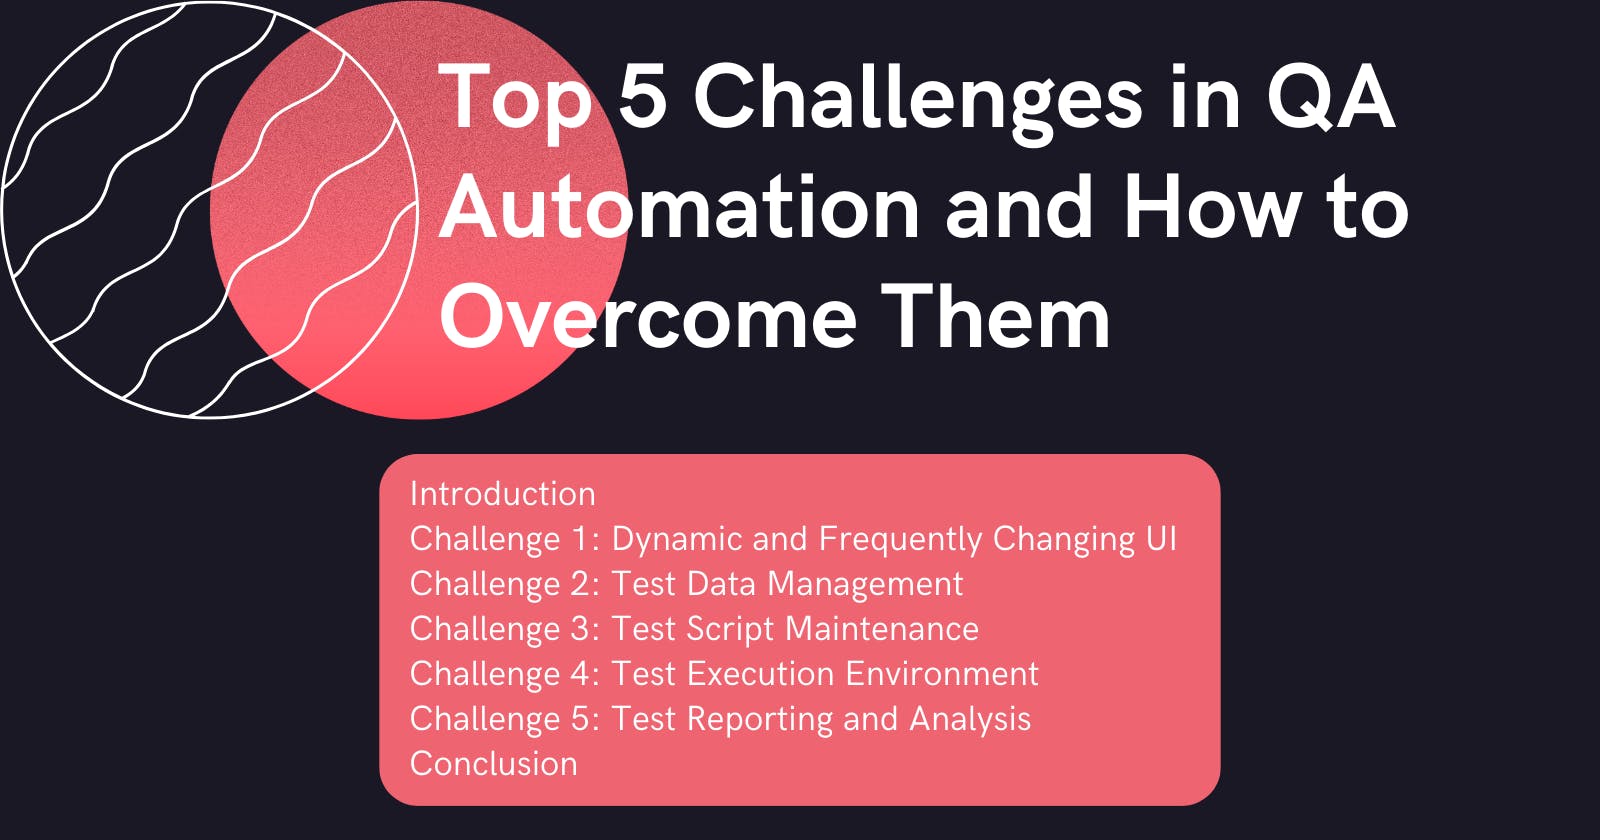 💡 Top 5 Challenges in QA Automation and How to Overcome Them 🚫